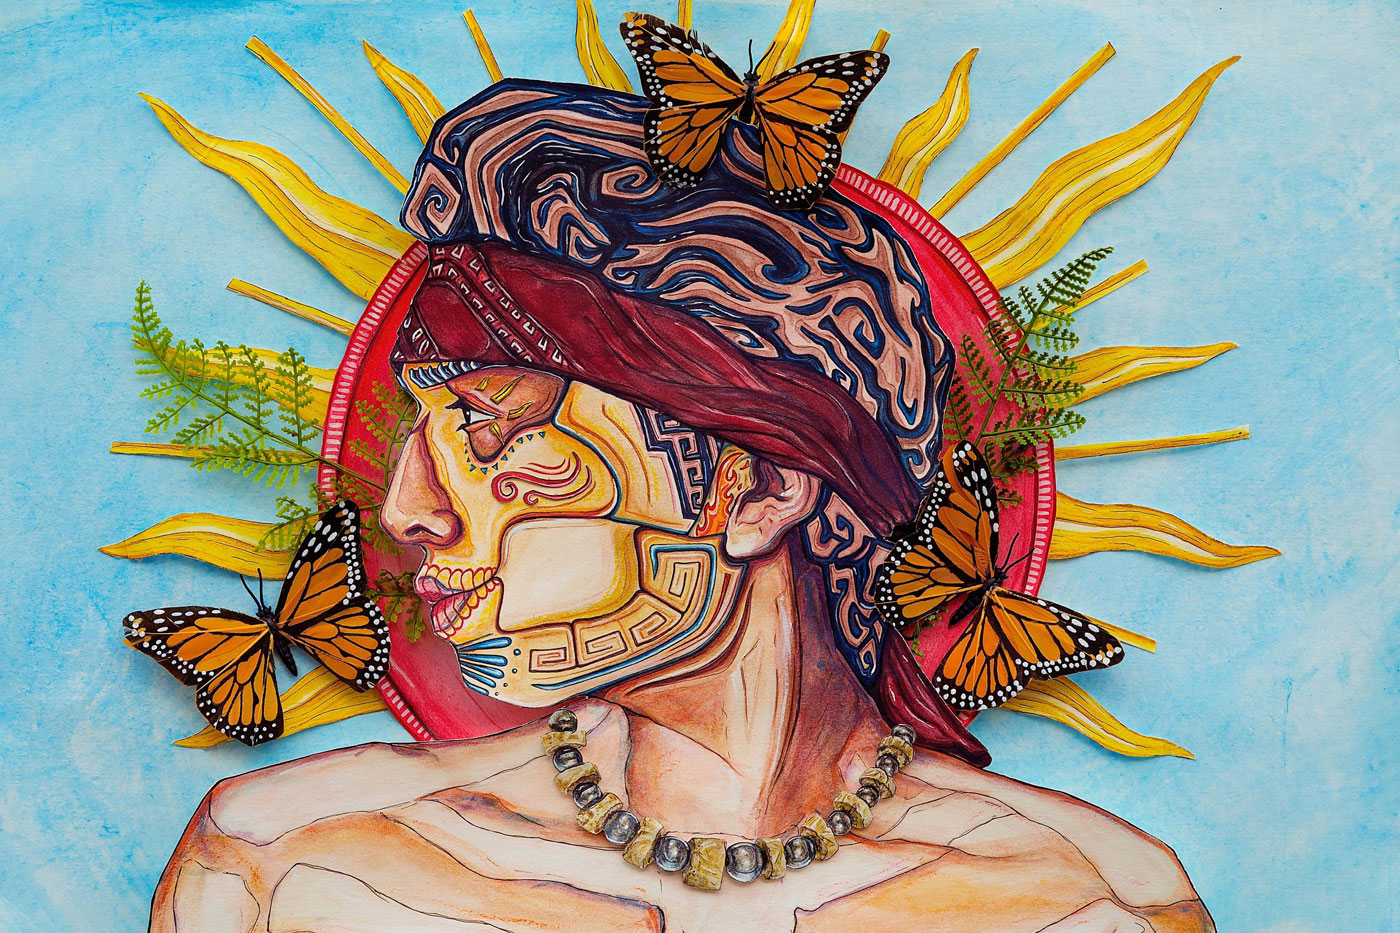 Colorful painting of the profile of a person's head with a butterflies and a sun int he background.